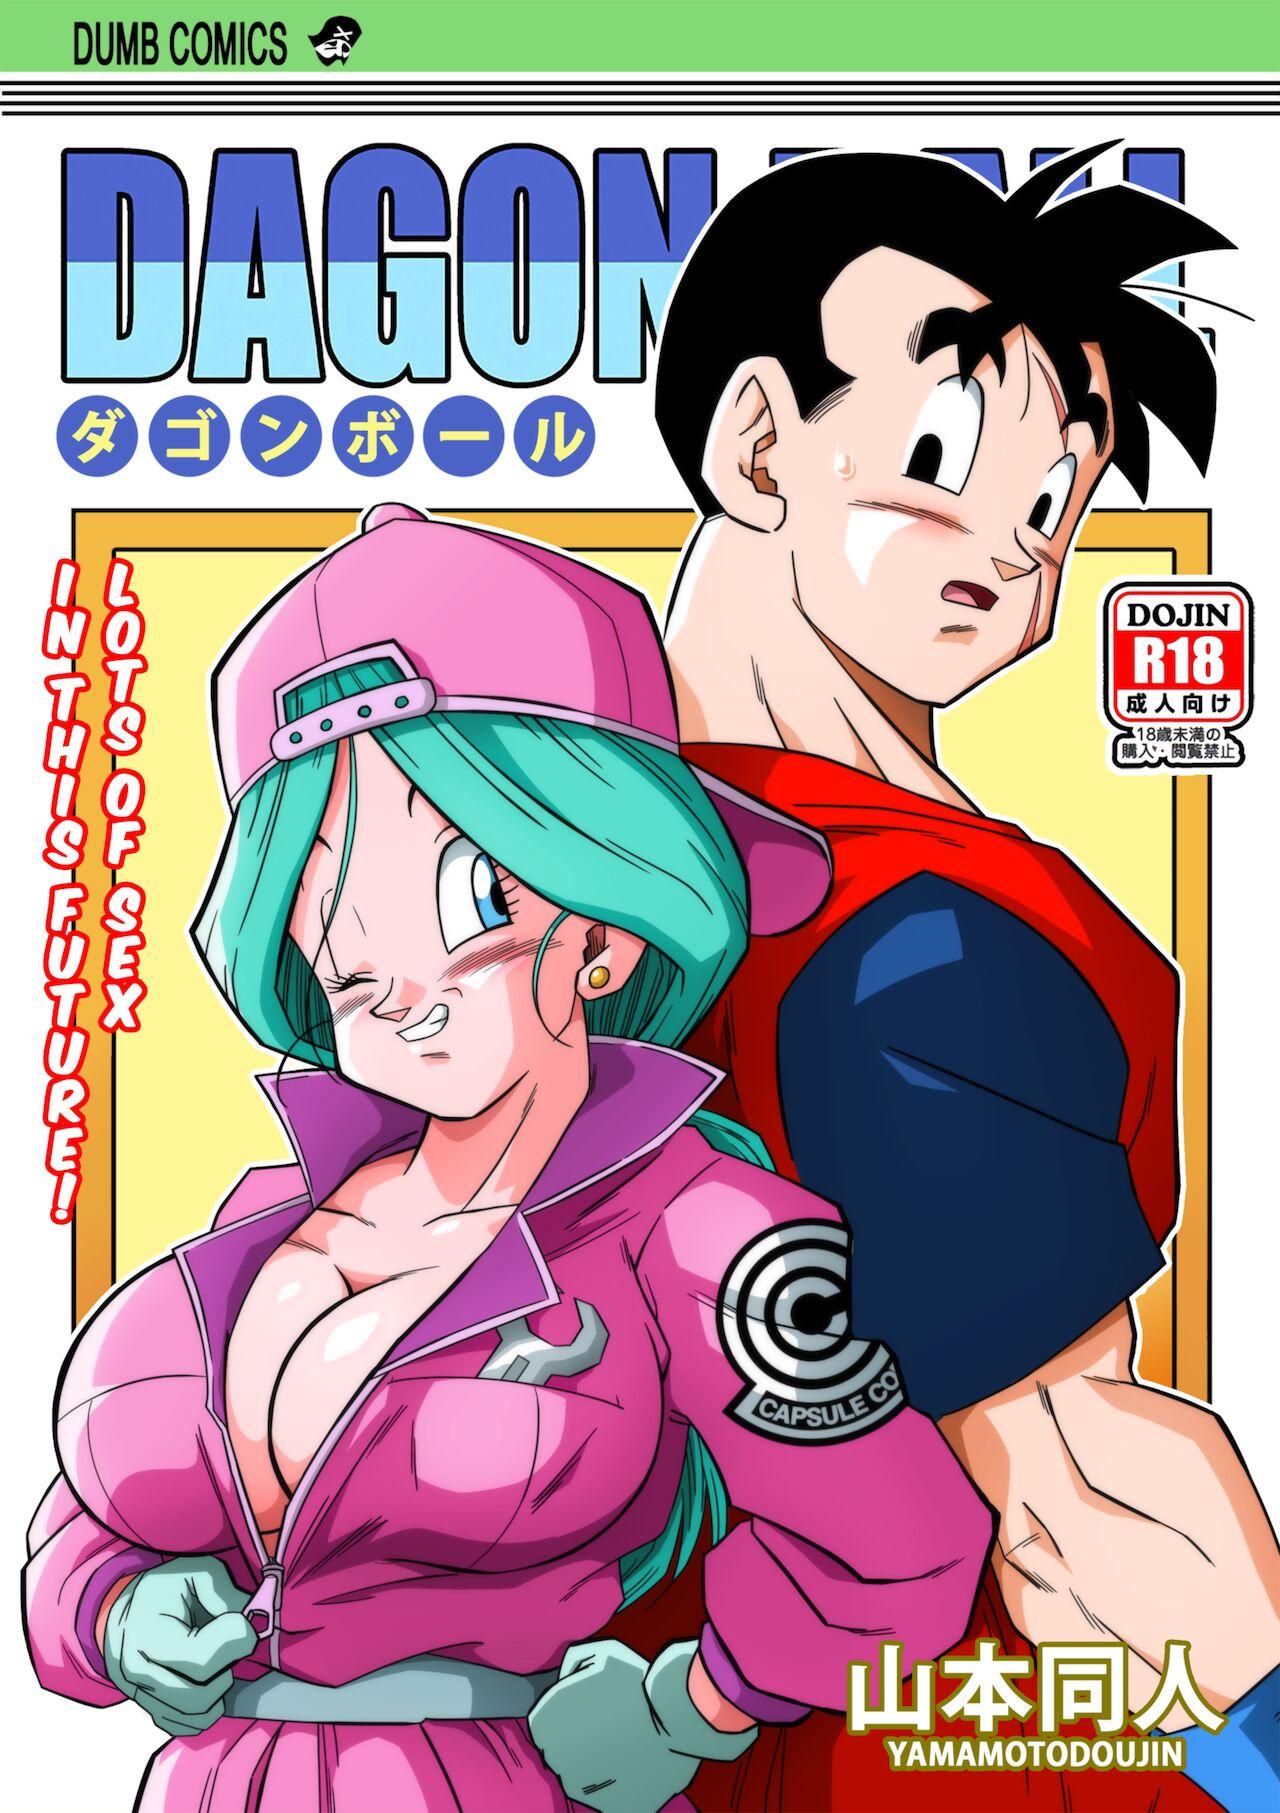 Boquete Lots of Sex in this Future!! - Dragon ball z Watersports - Picture 1